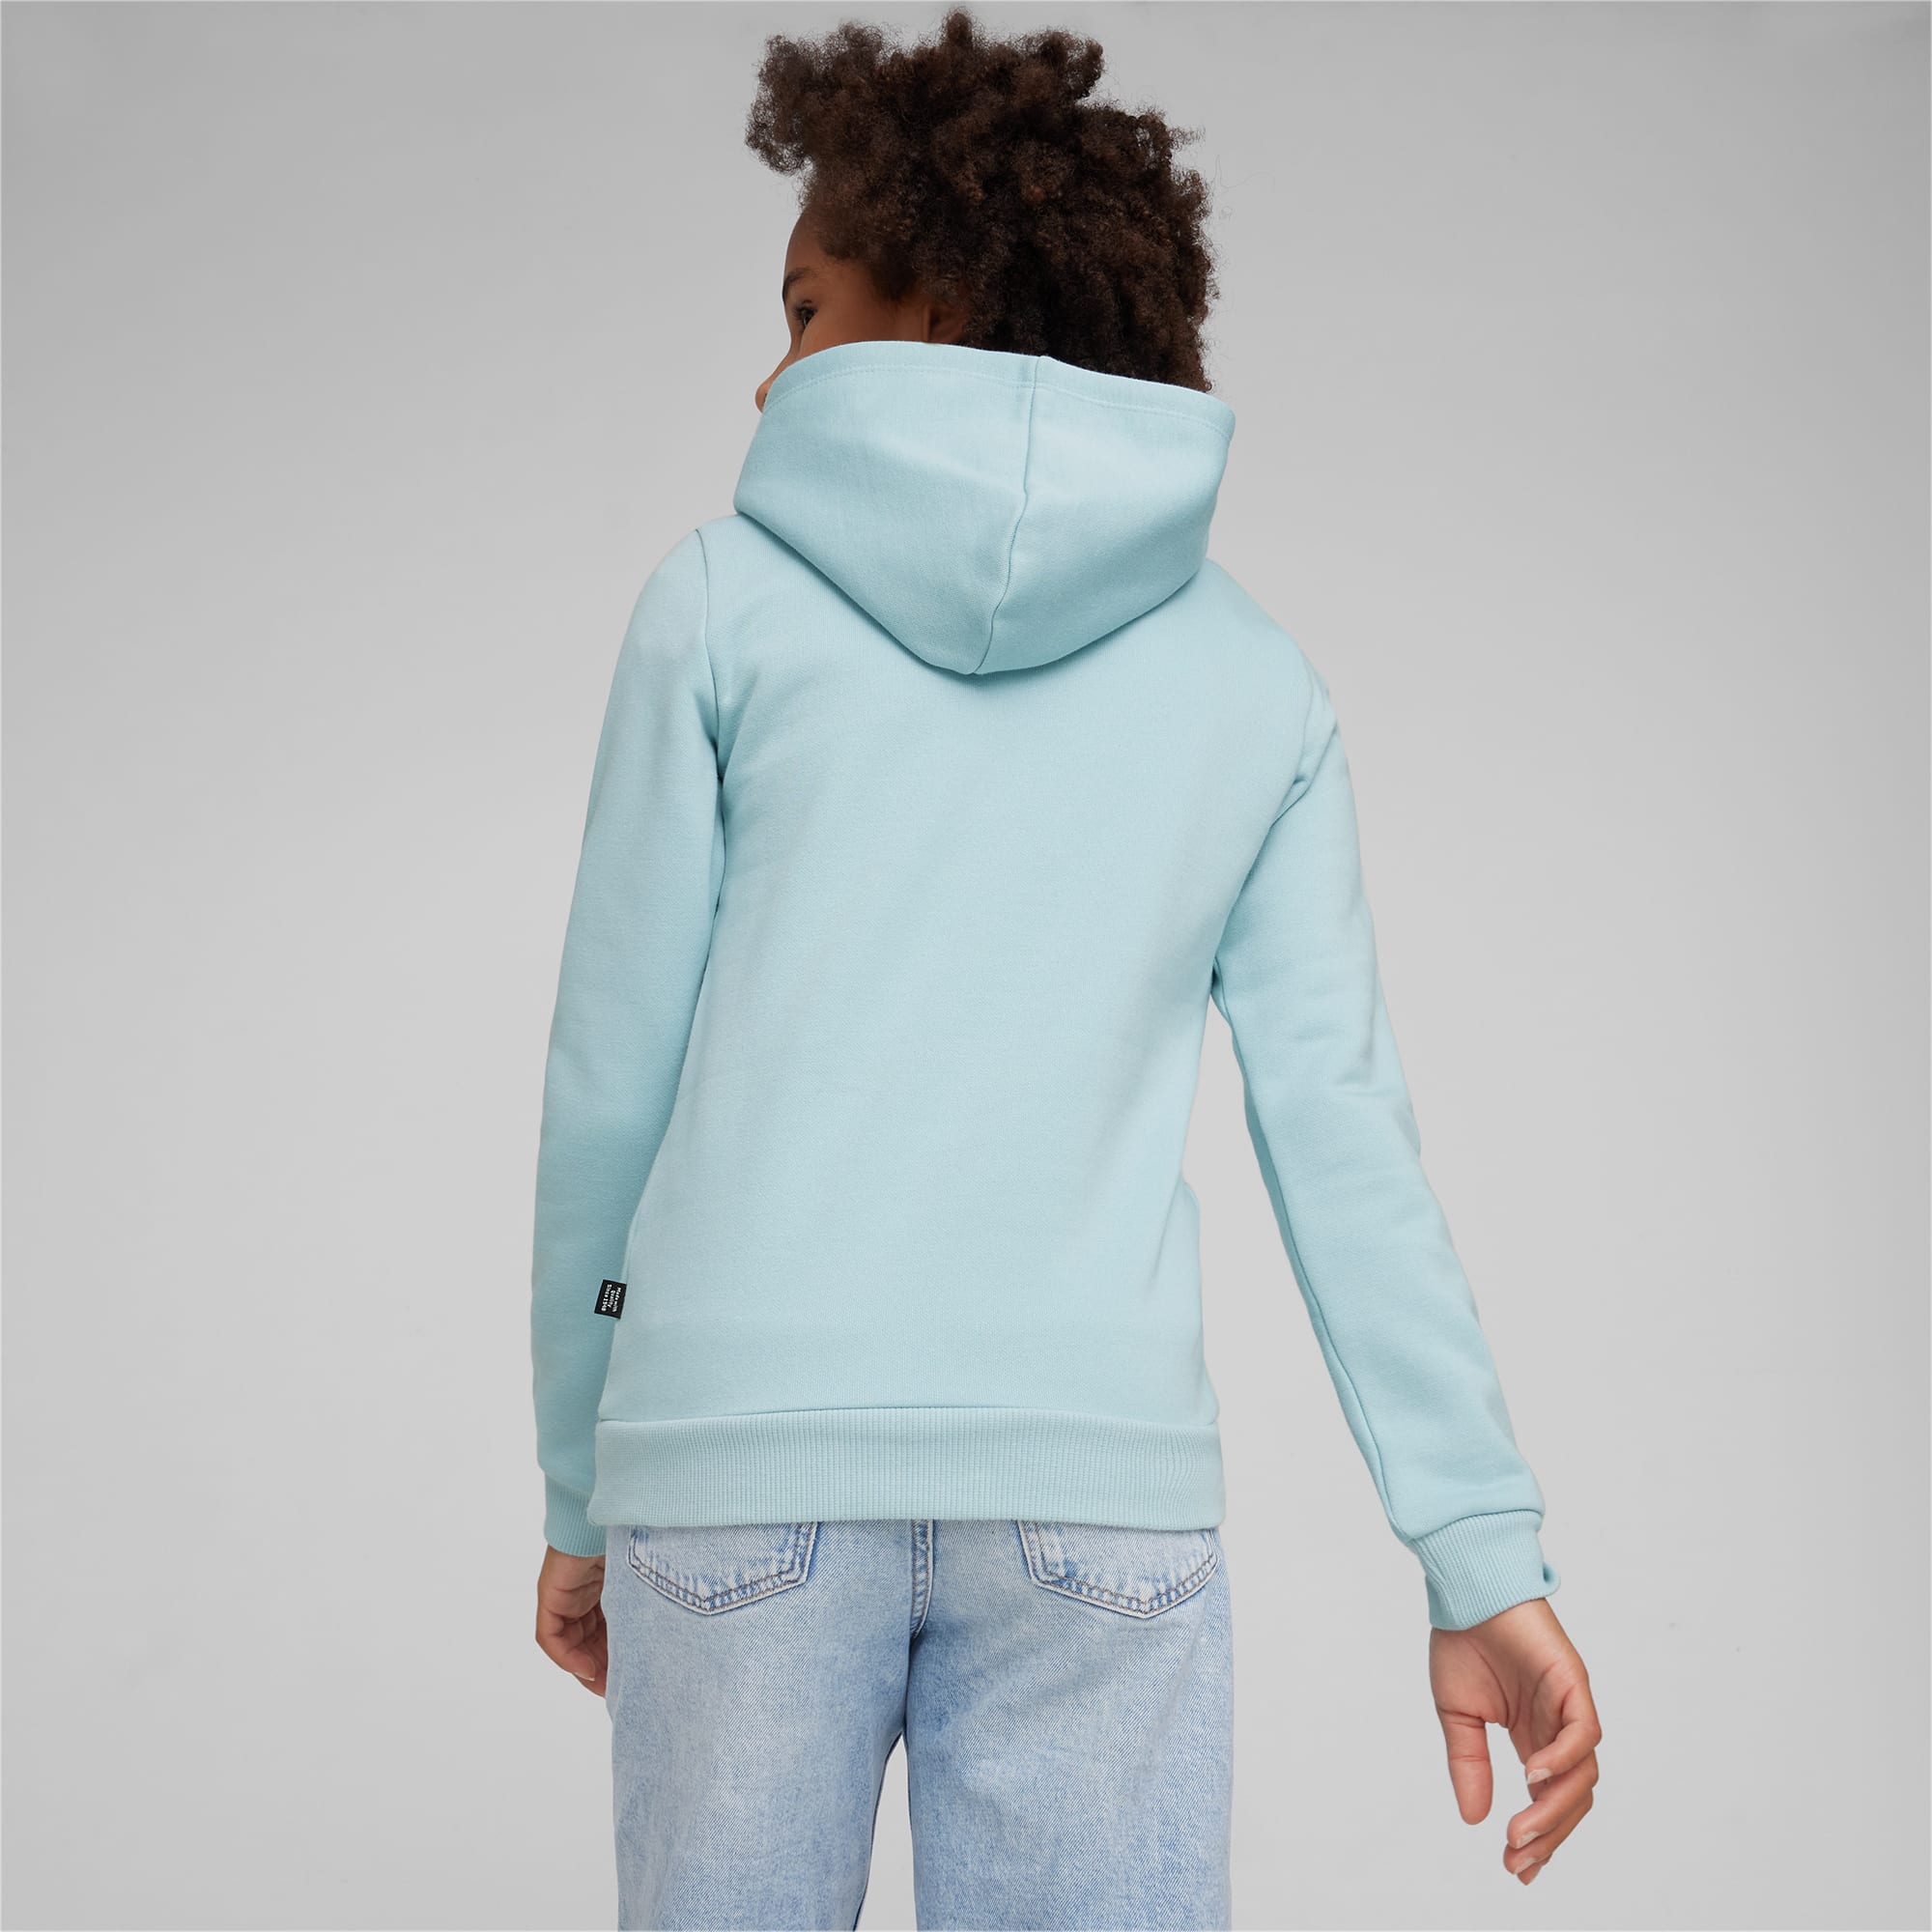 PUMA Essentials Logo Youth Hoodie, Turquoise Surf, Size 116, Clothing